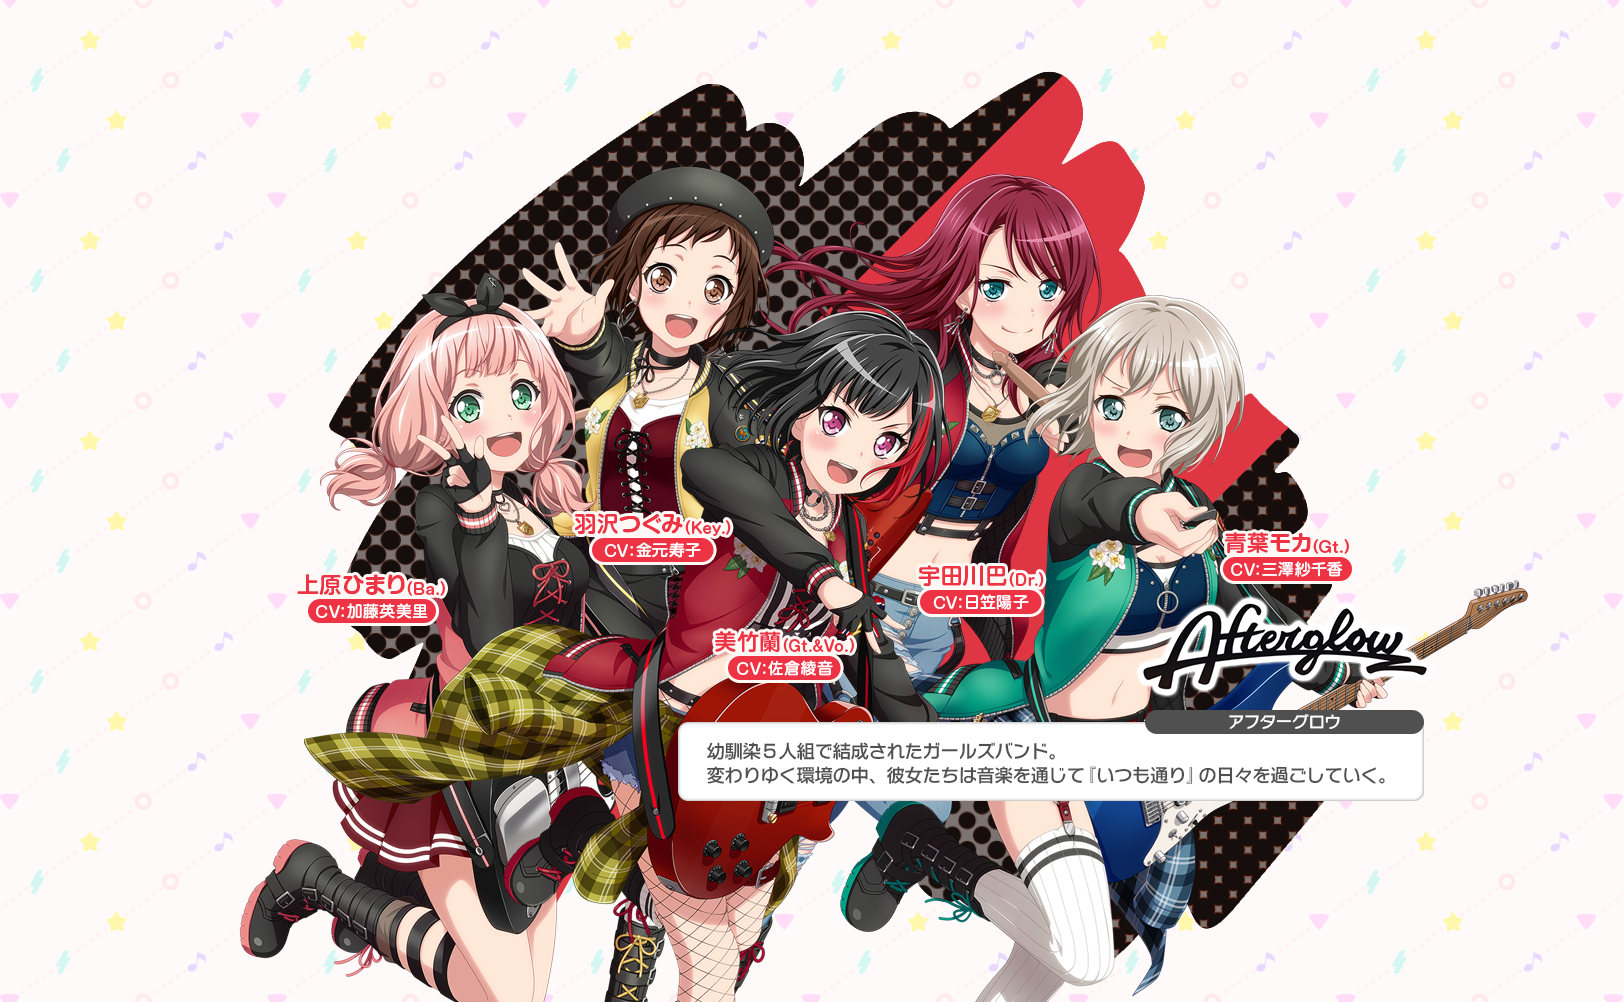 S2 Outfit Loading Splash - Afterglow